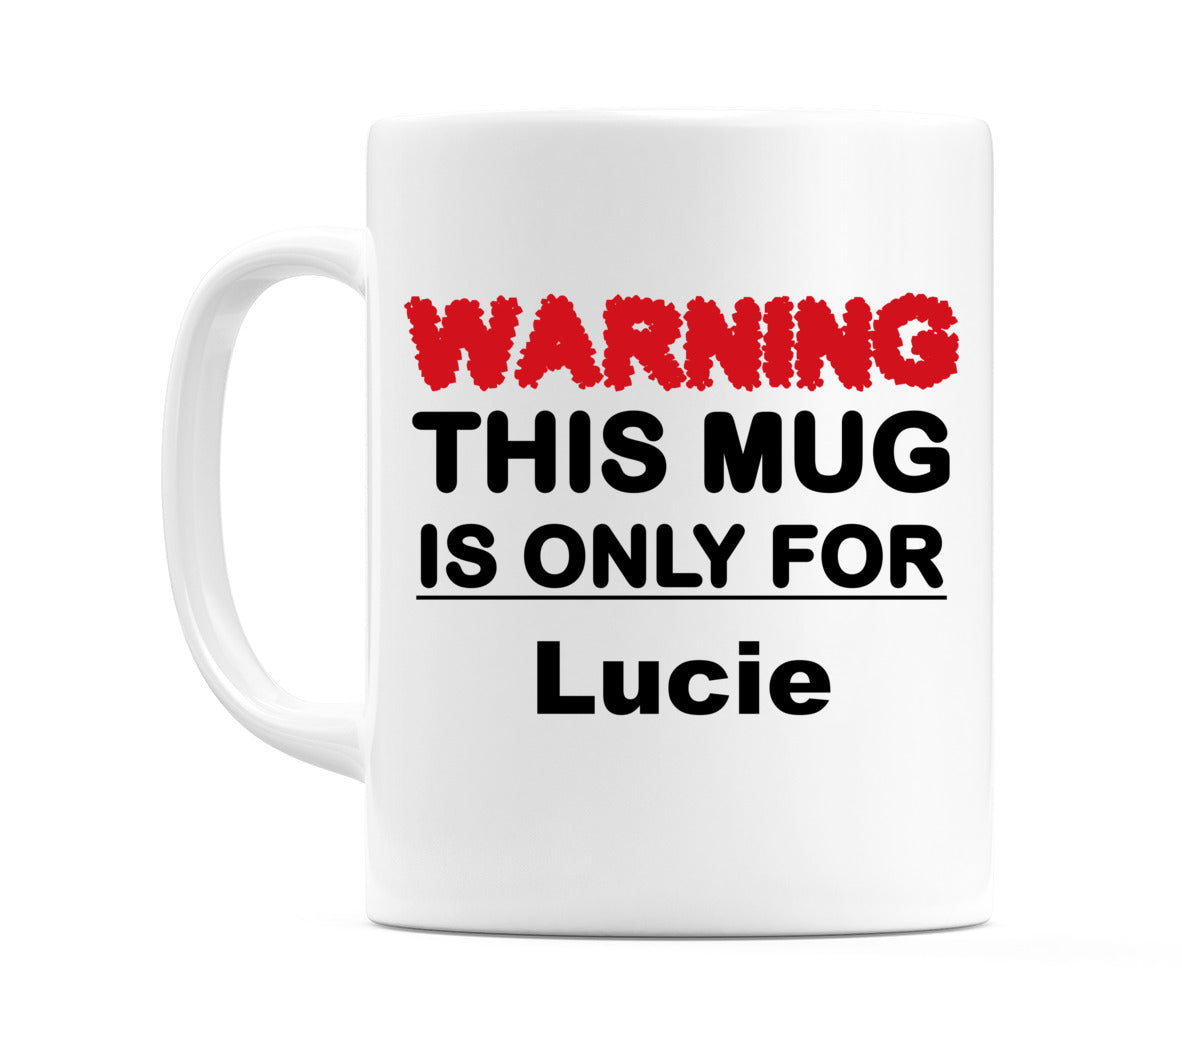 Warning This Mug is ONLY for Lucie Mug